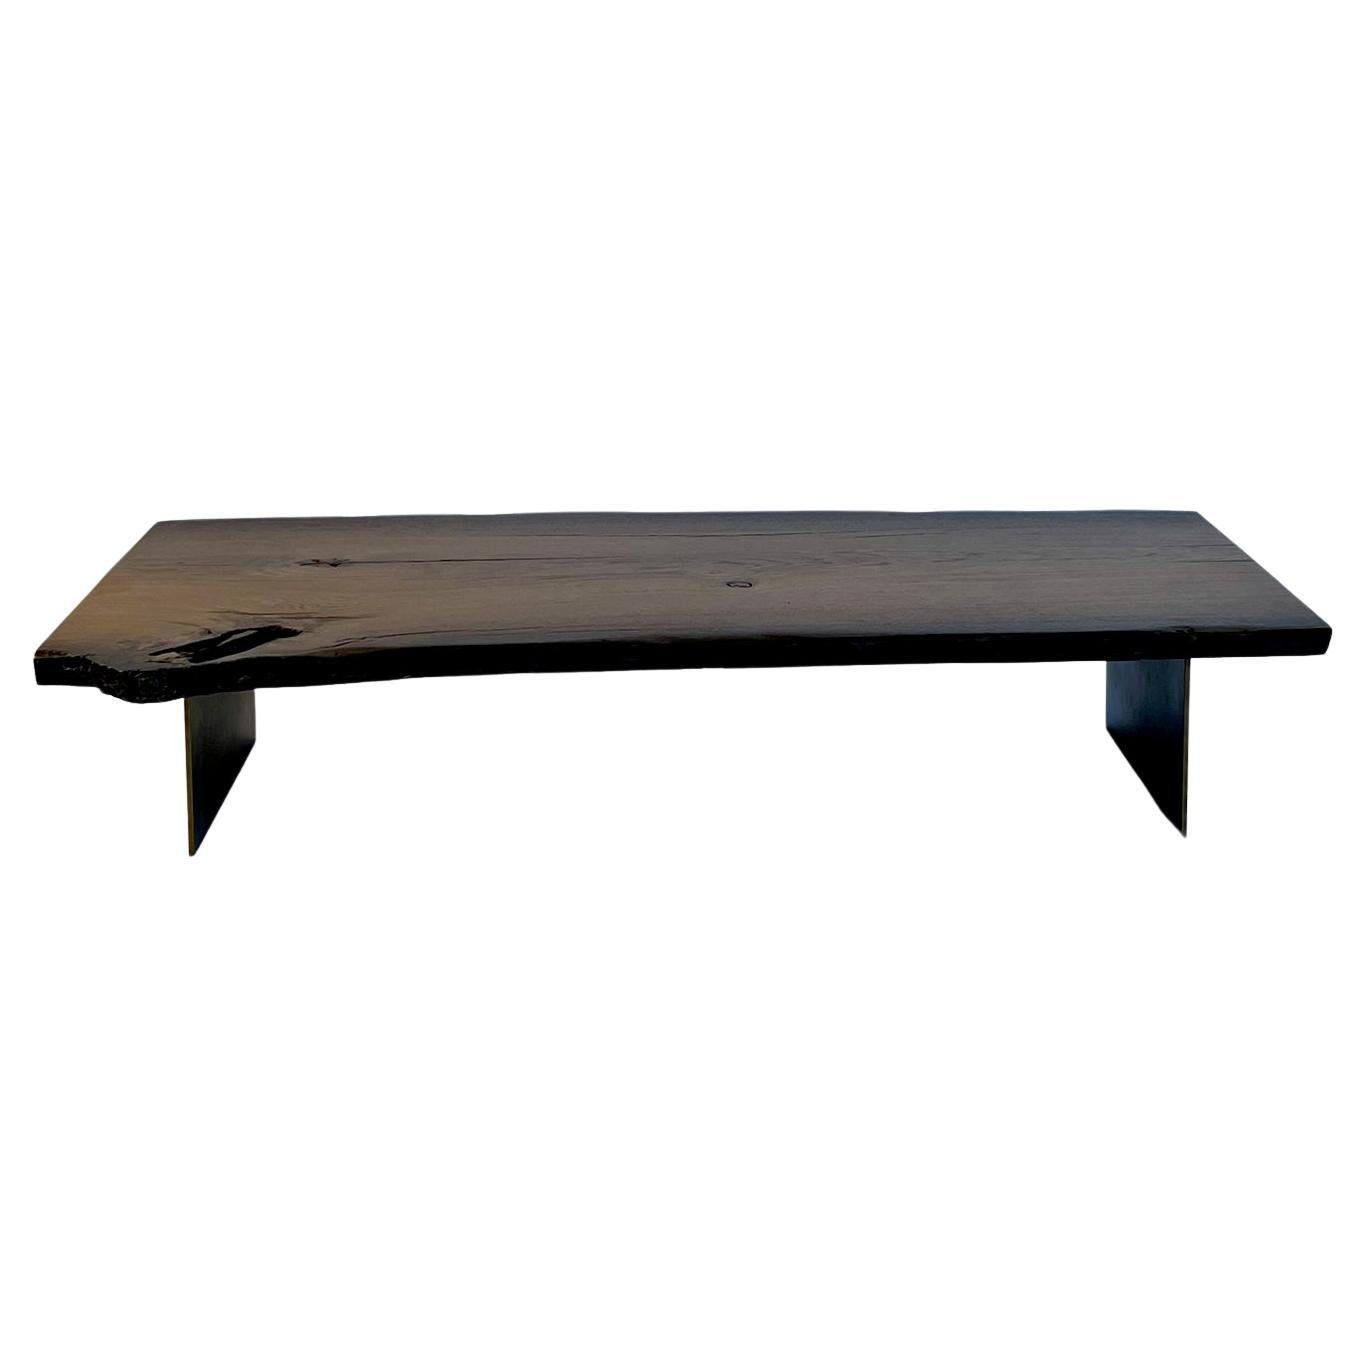 Wooden coffee table with steel base